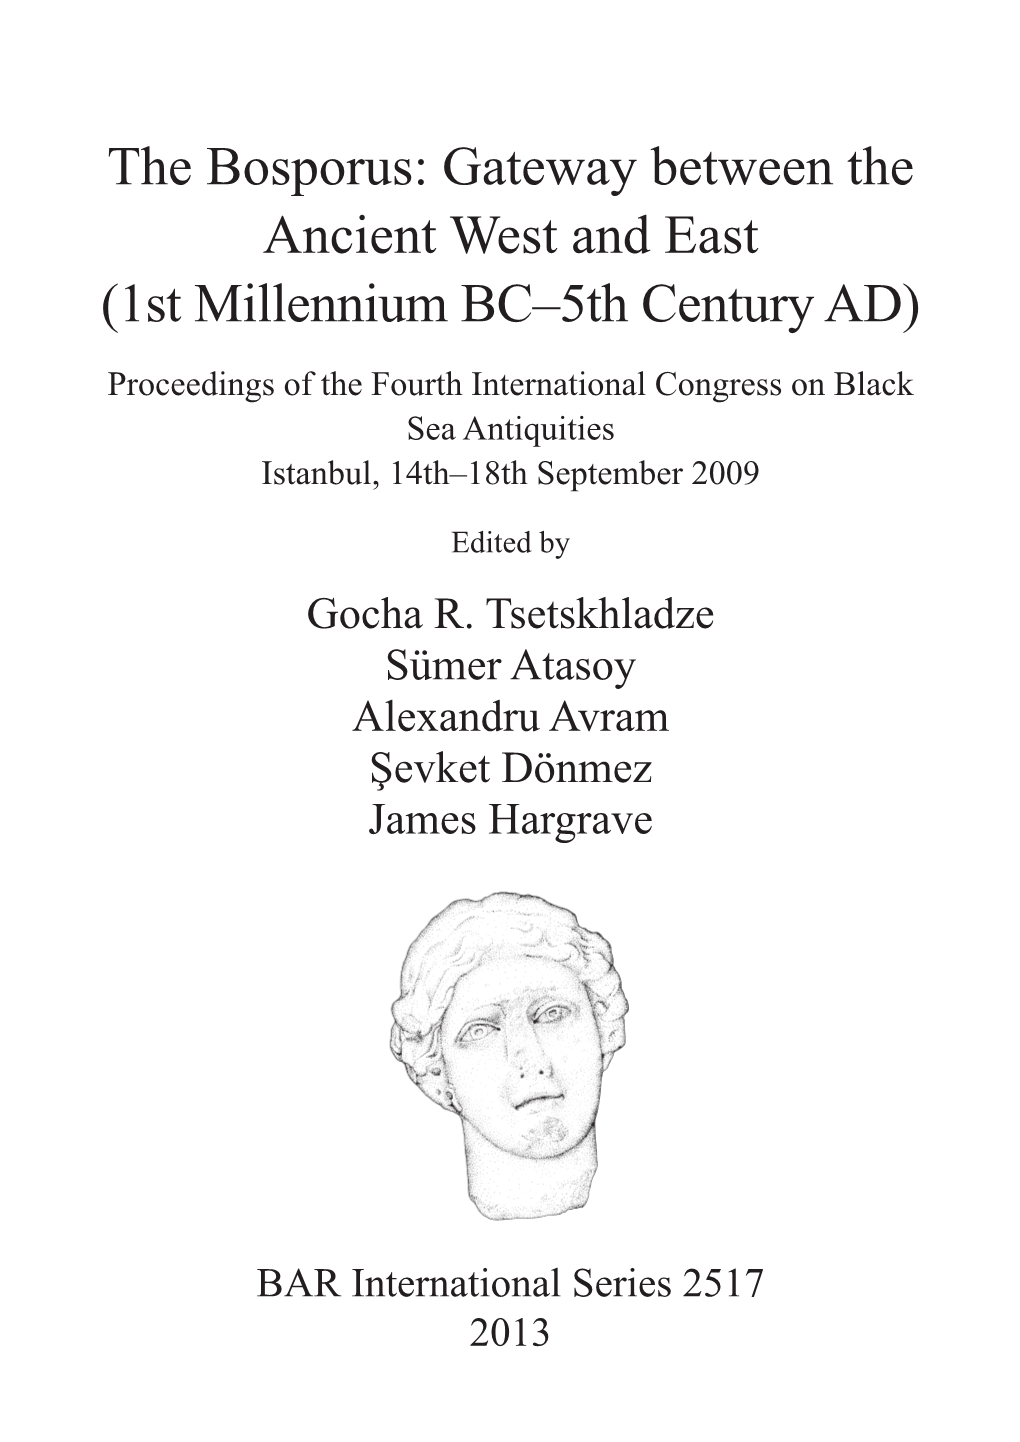 1St Millennium BC–5Th Century AD) Proceedings of the Fourth International Congress on Black Sea Antiquities Istanbul, 14Th–18Th September 2009